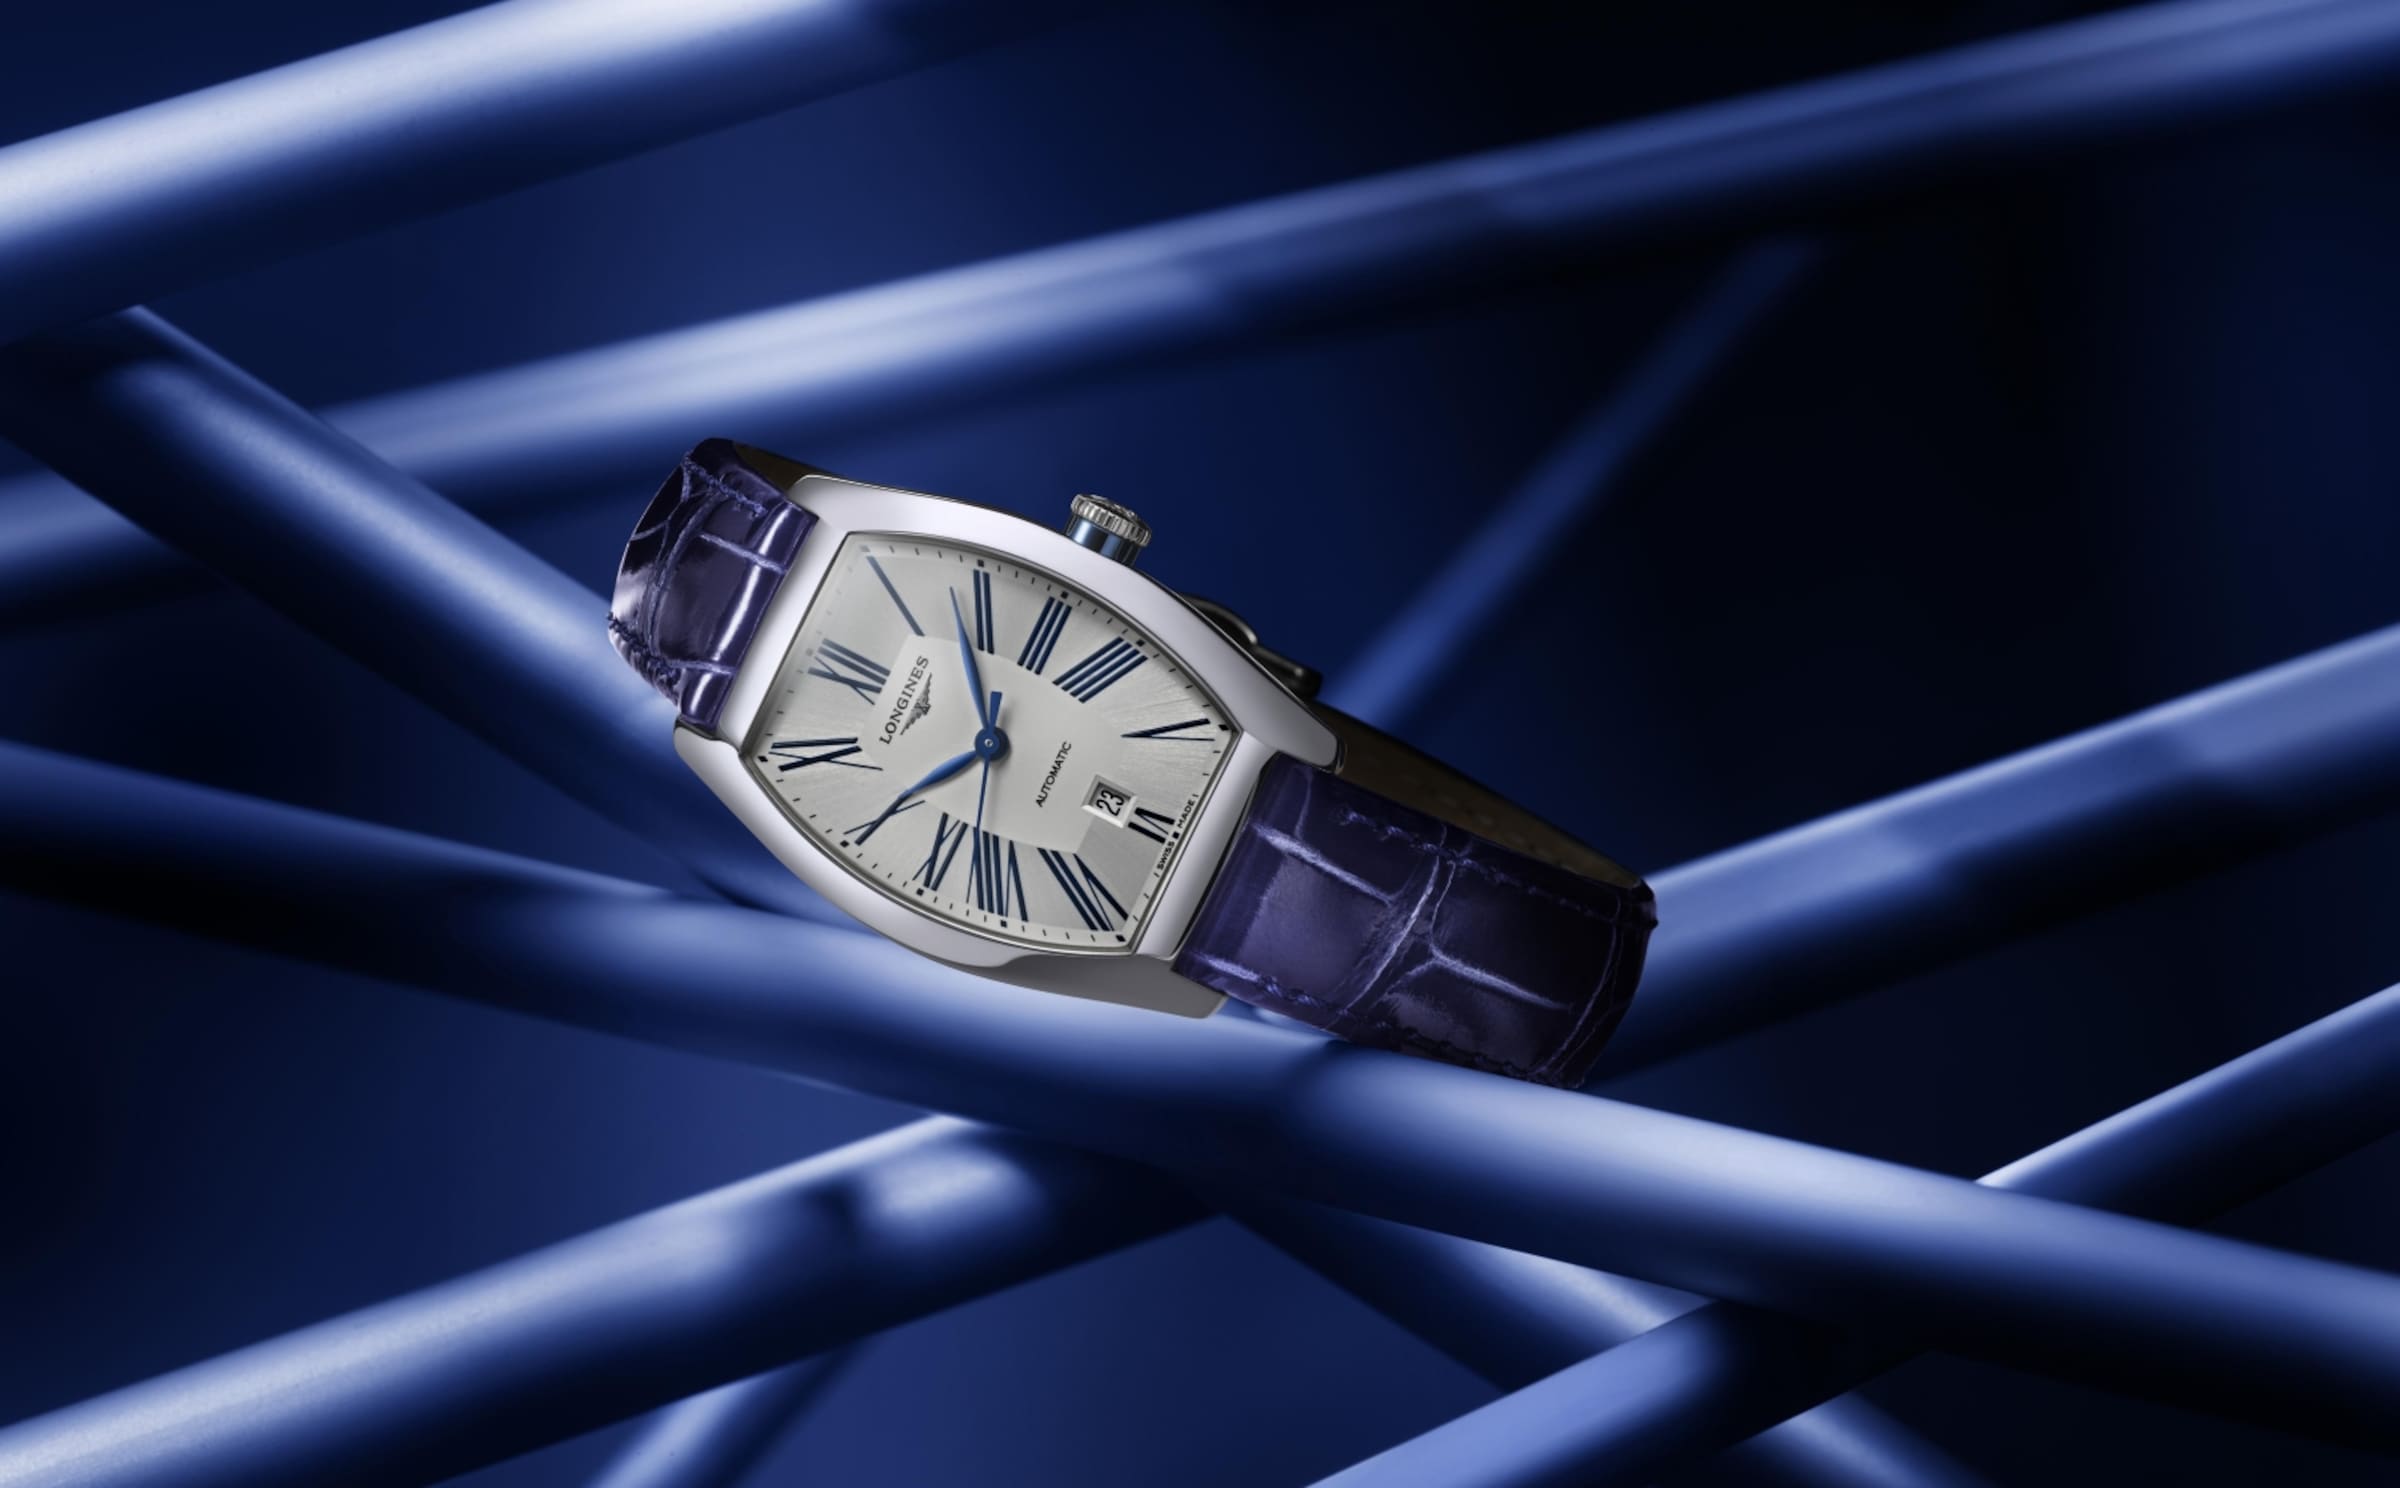 Blue model of the Longines evidenza watch